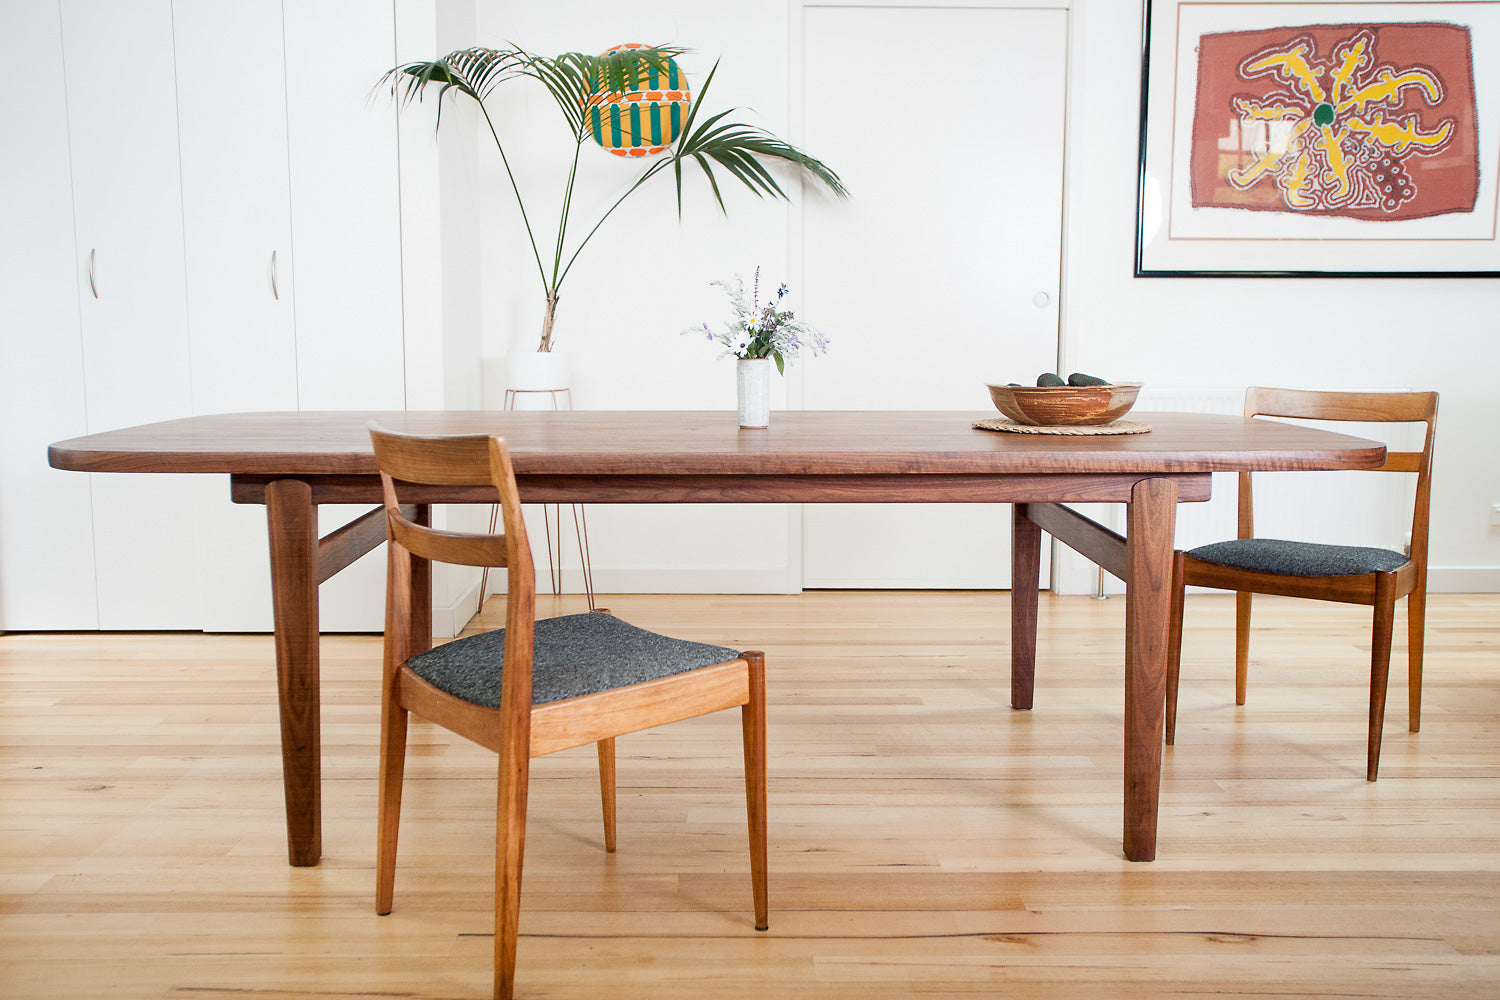 Wesley Dining Table in Walnut with dining chairs, bowl of avocados and plant in background - front view. Designed and made by Hey, Porter.